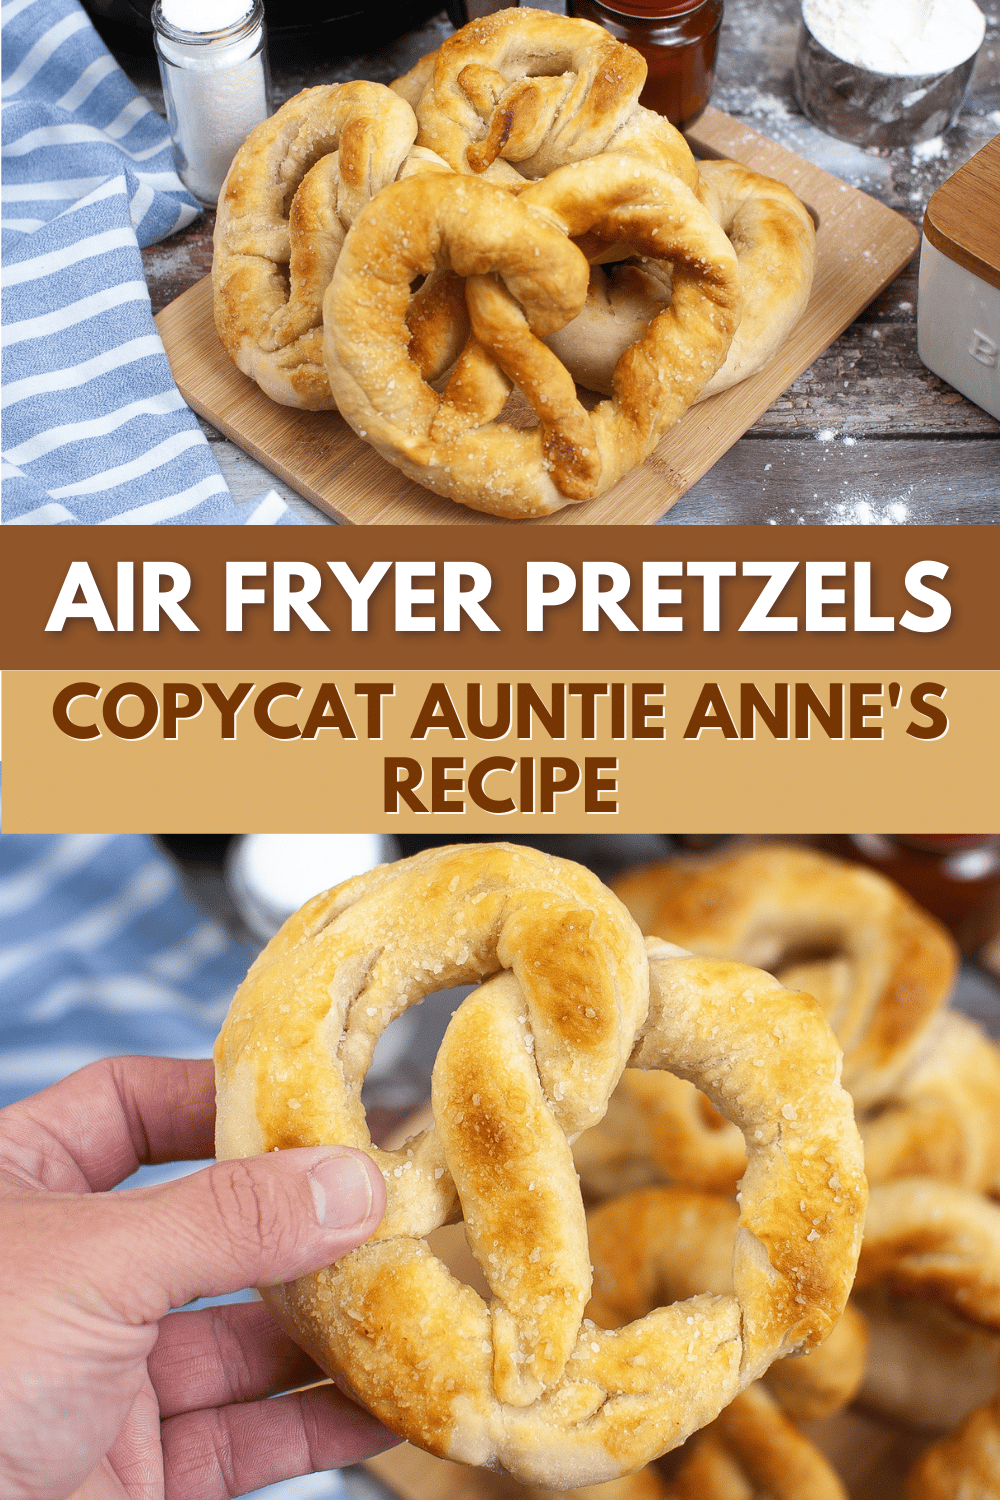 These Air Fryer Pretzels taste just like Auntie Anne’s, but you don’t have to leave the house or wait in line to get them. #airfryerpretzels #copycatauntieannespretzels #airfryer #softpretzels #homemadepretzels via @wondermomwannab